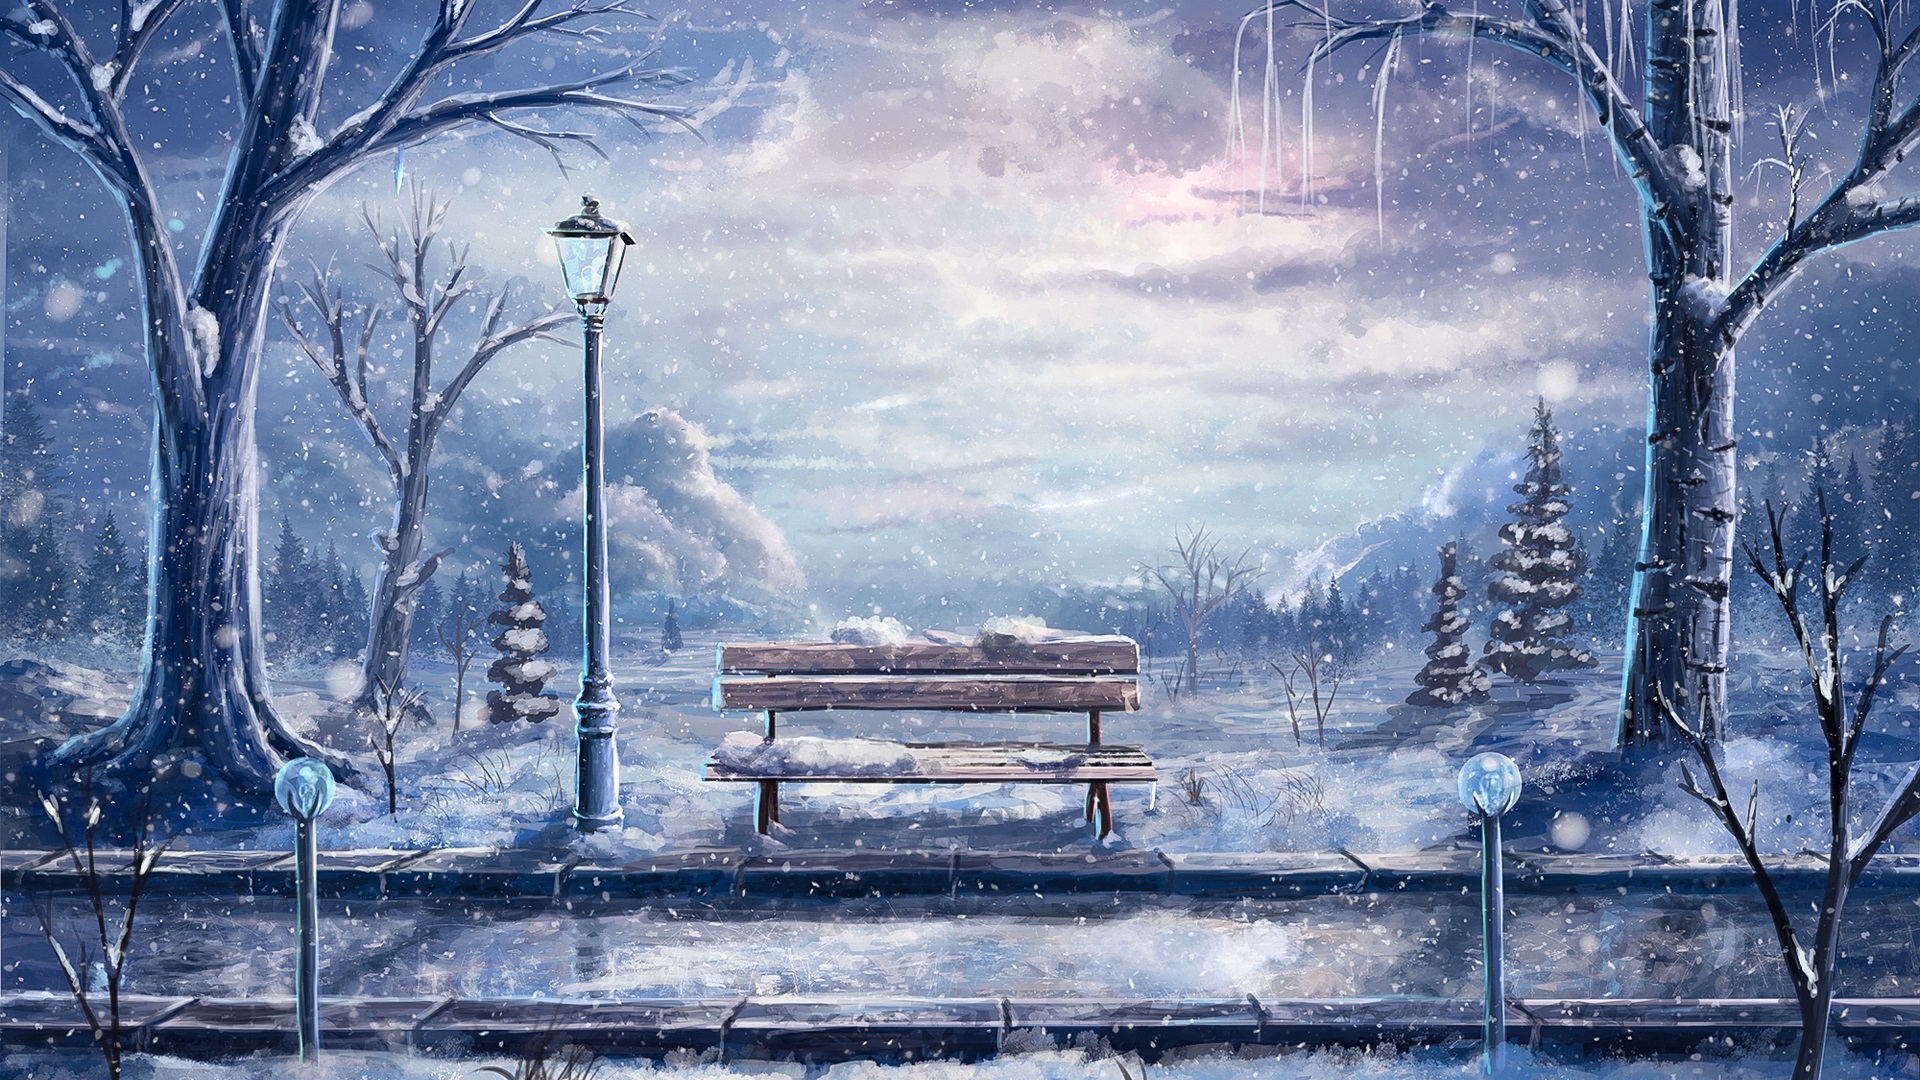 Wallpaper Art painting, winter, snow, bench, lantern, trees 1920x1200 HD Picture, Image